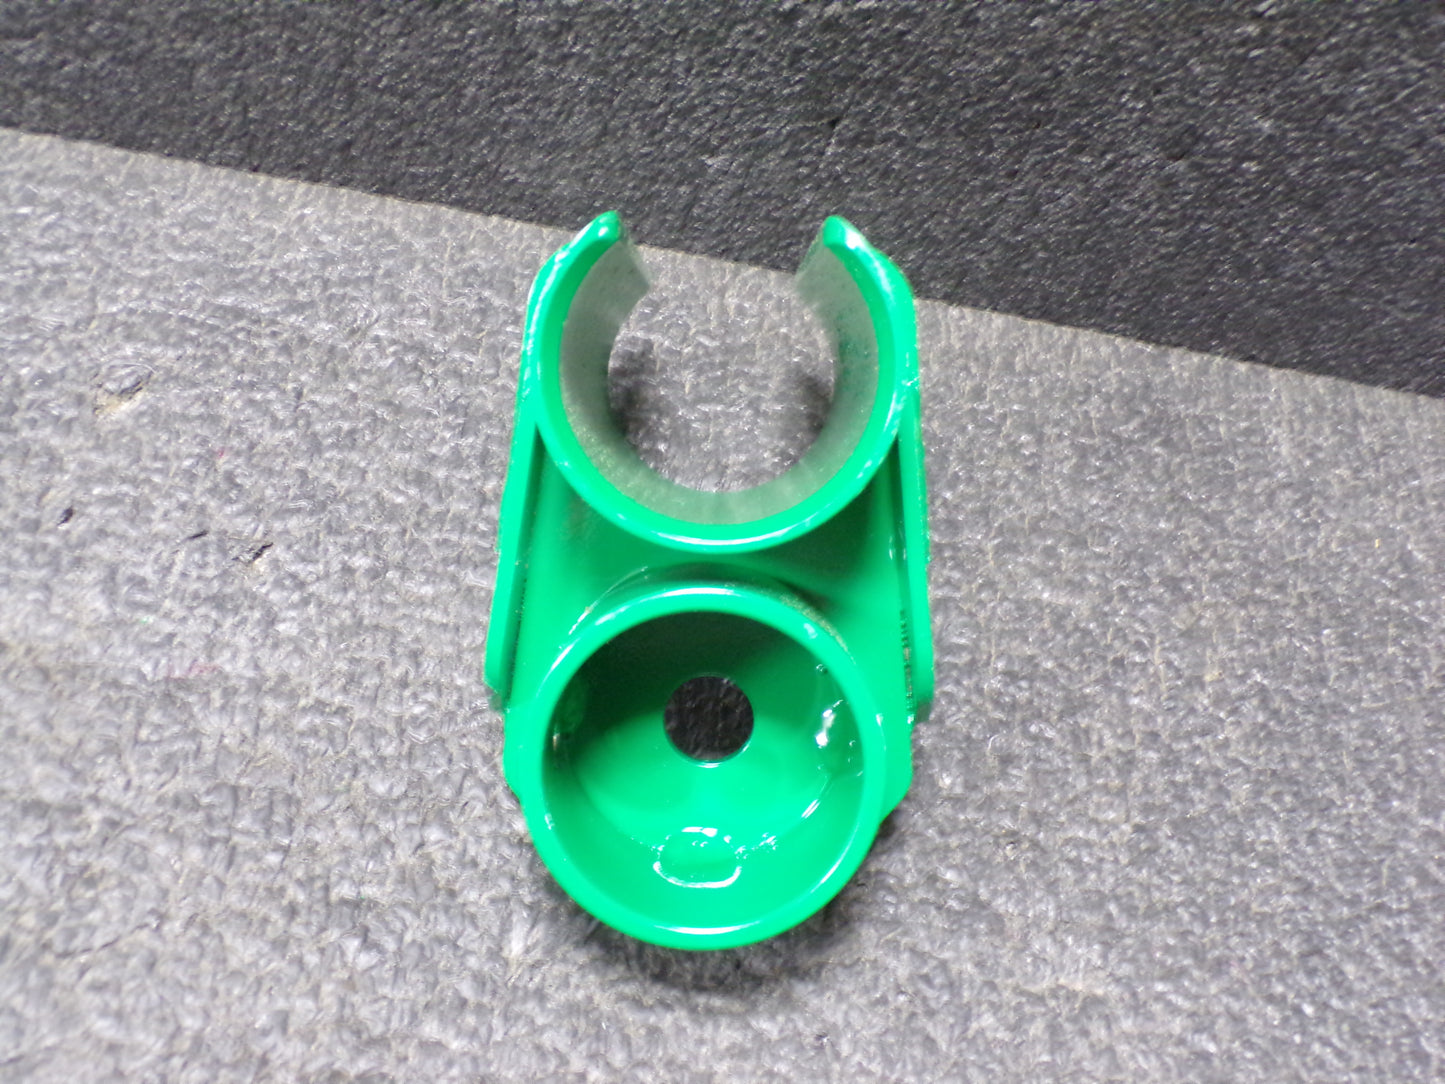 GREENLEE 3-1/2 in. Adapter Weldment Slip In Coupling For UT8 (CR00391-WT12)